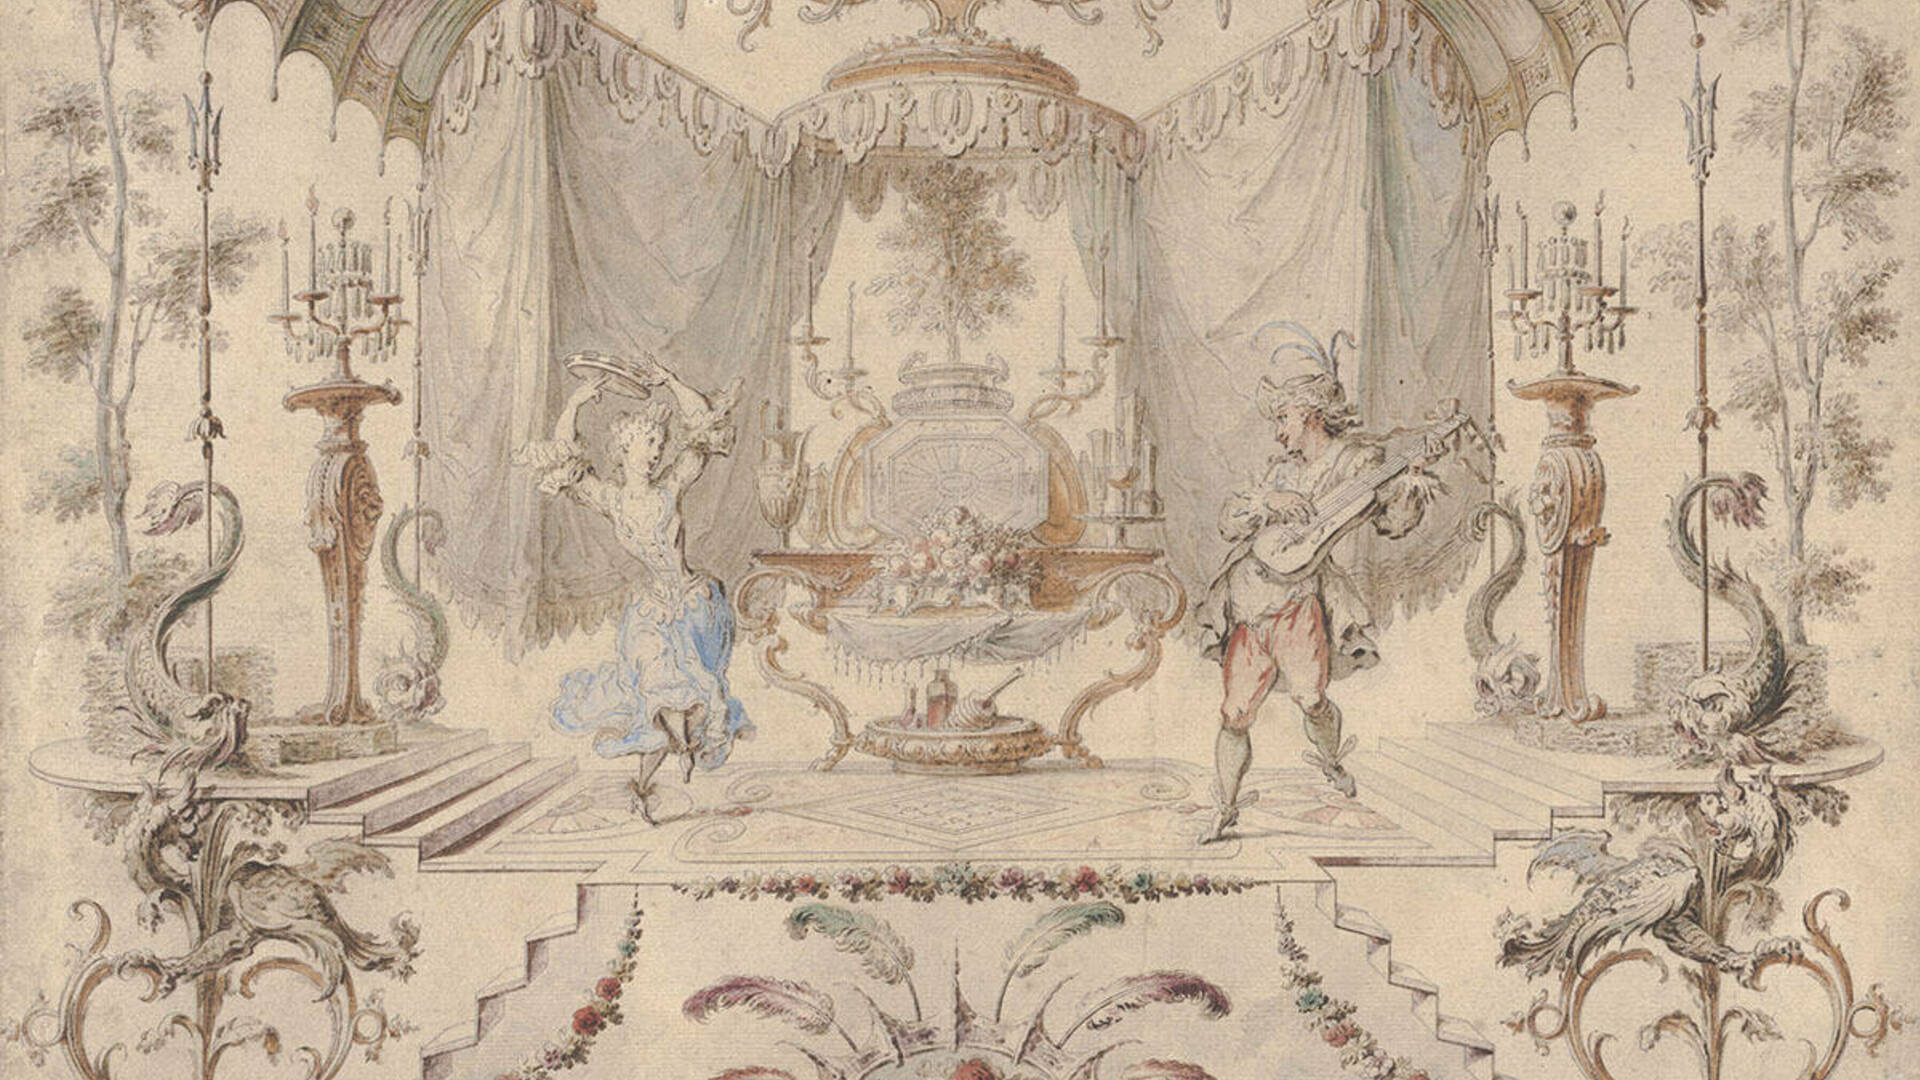 Gilles-Marie Oppenord (French, 1672–1742), An Ornamental Cartouche, ca. 1700, pen and gray ink and brown wash and watercolor on laid paper. On extended loan from Mr. John D. Reilly '63, L2009.005.003